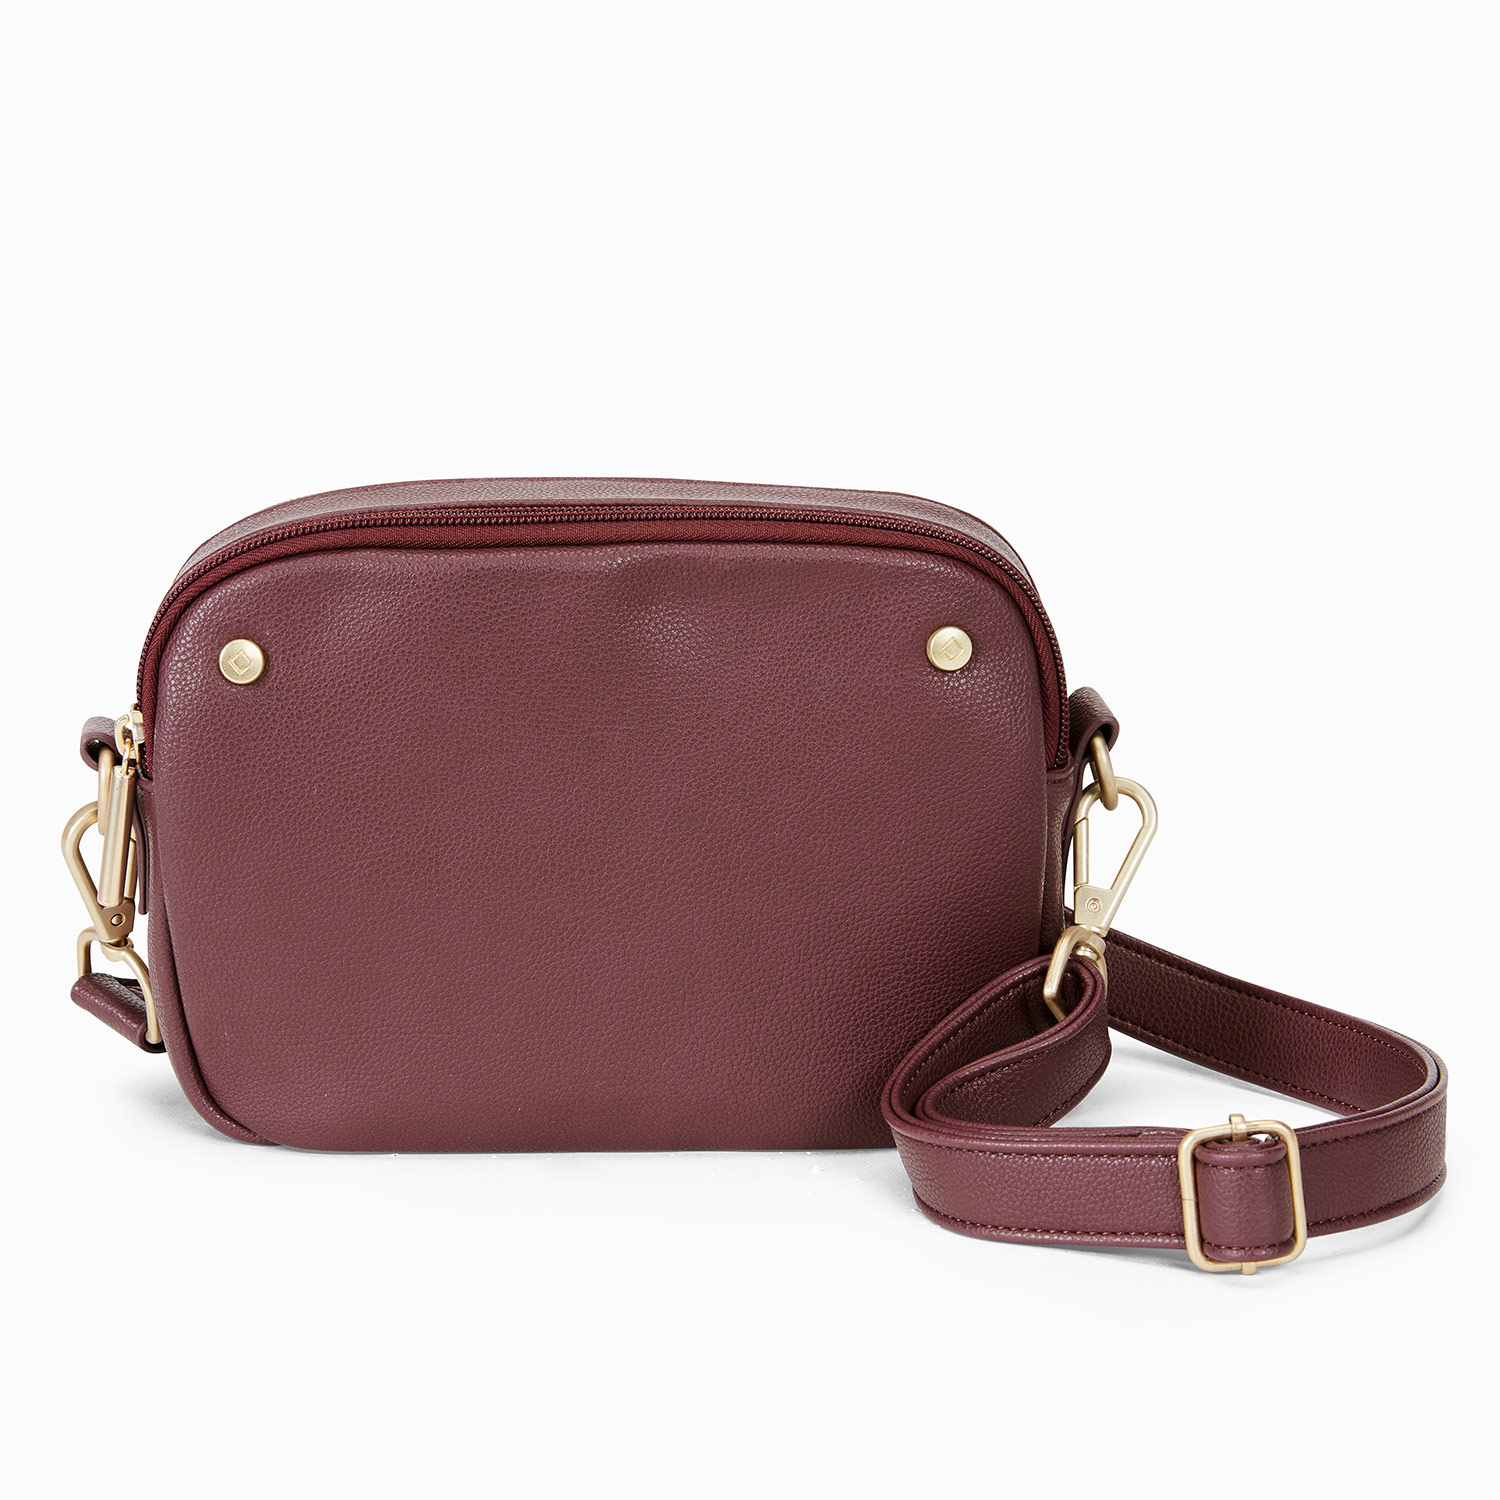 Mulberry Plaque Classic Grain Leather Small Zip Around Purse, Mulberry  Green at John Lewis & Partners